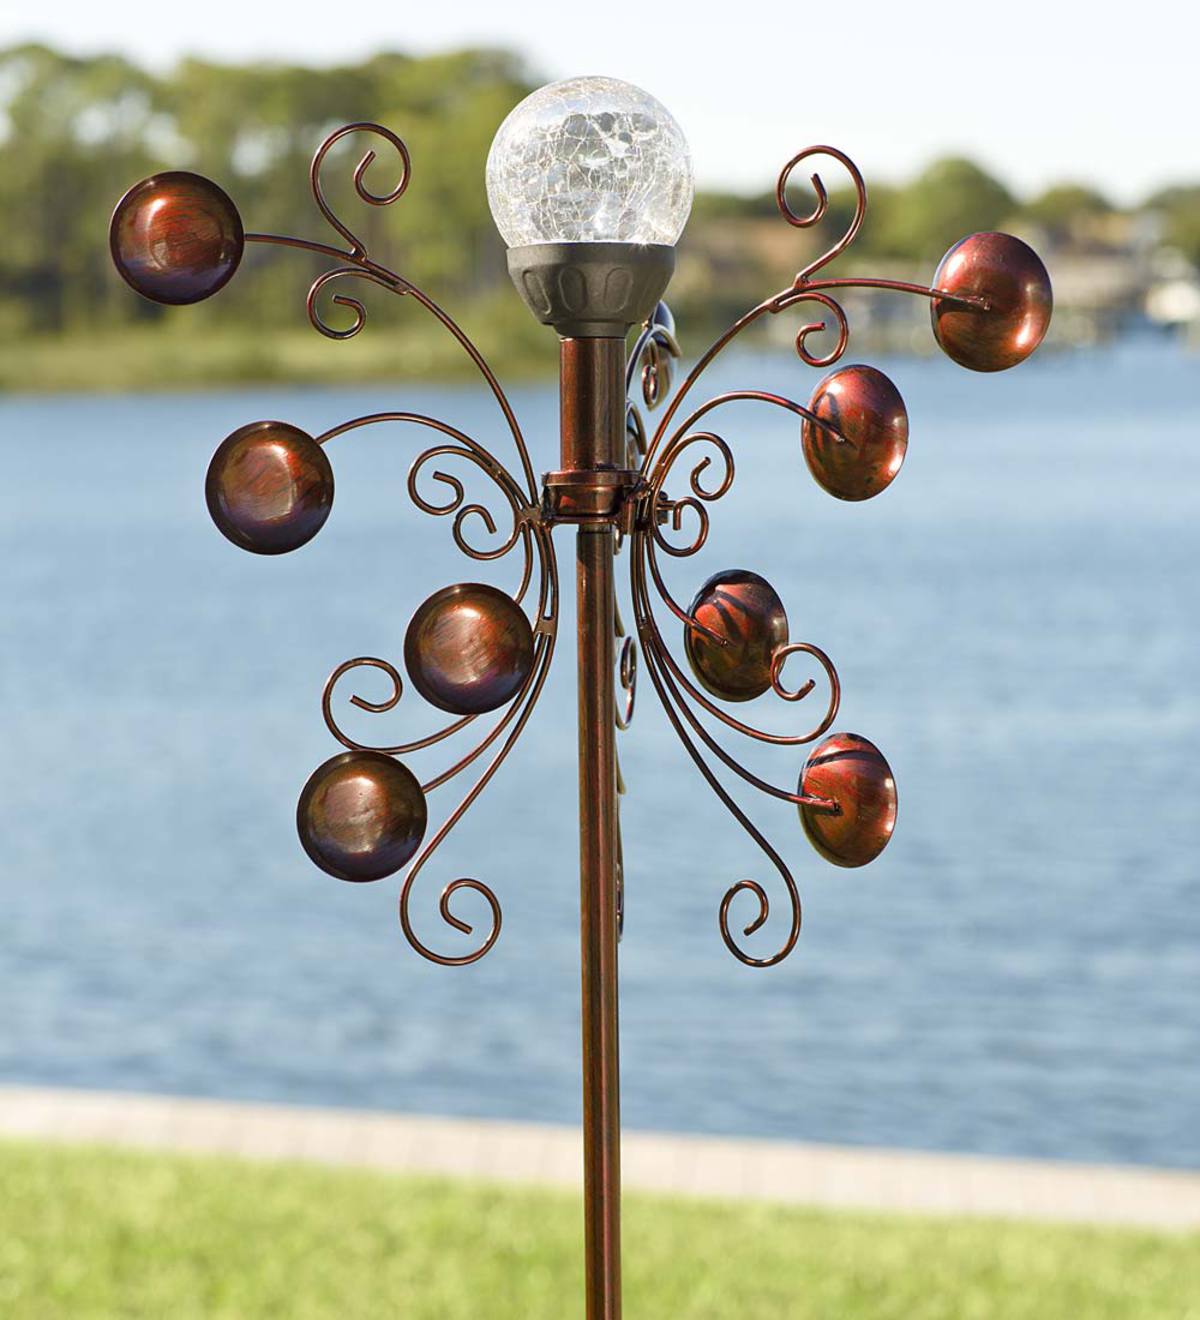 Ornate Bronze-Colored Metal Wind Spinner with Solar Color-Changing Crackle-Glass Orb